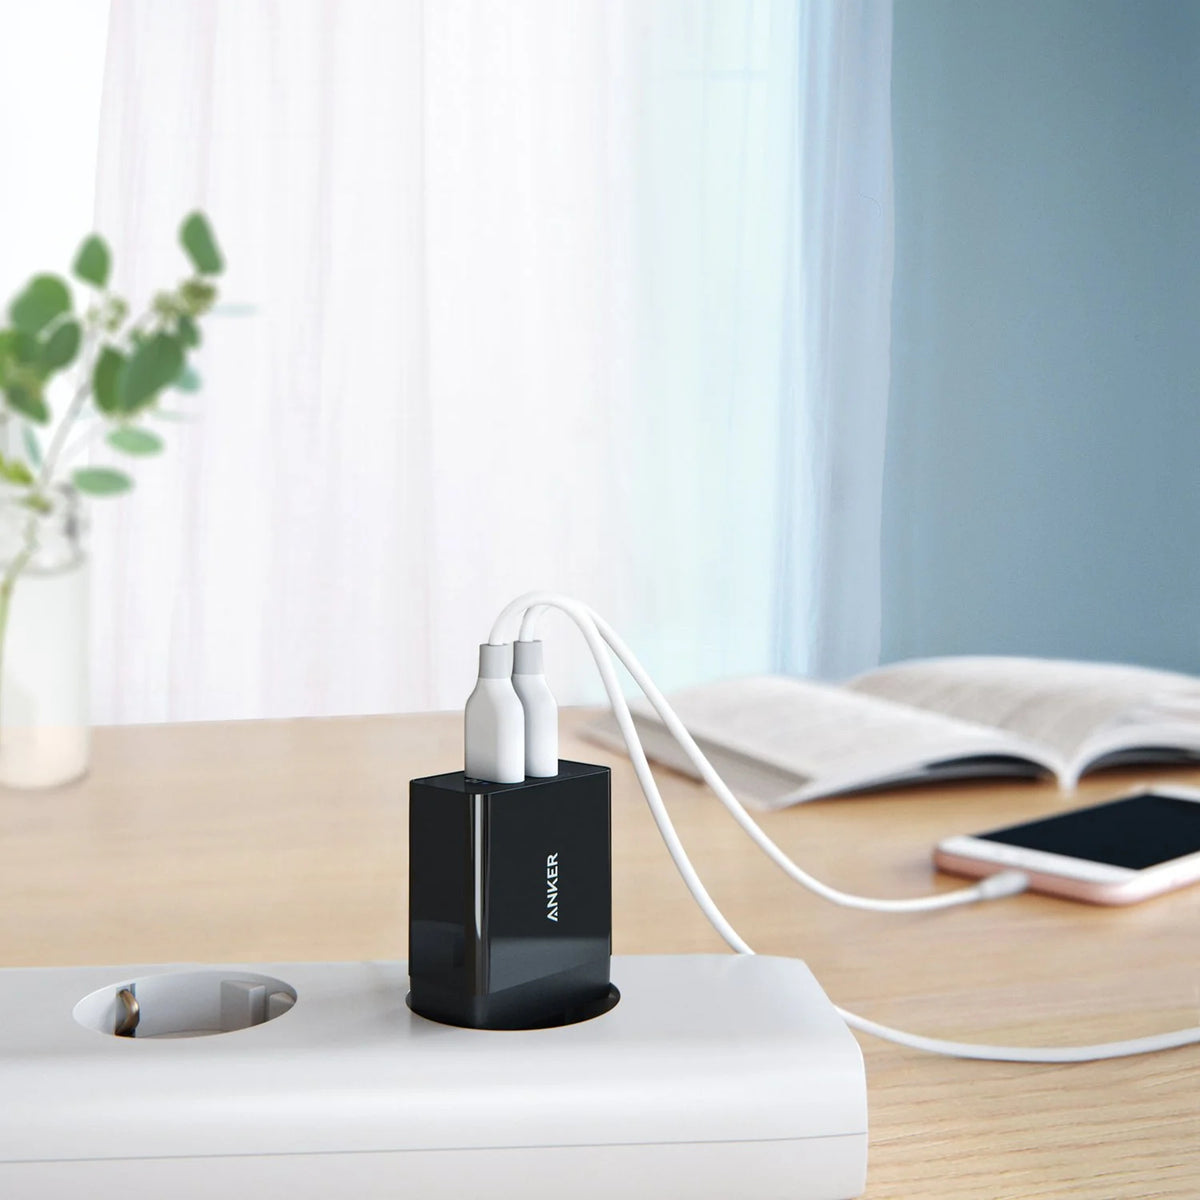 Anker 24W 2-Port USB Wall Charger